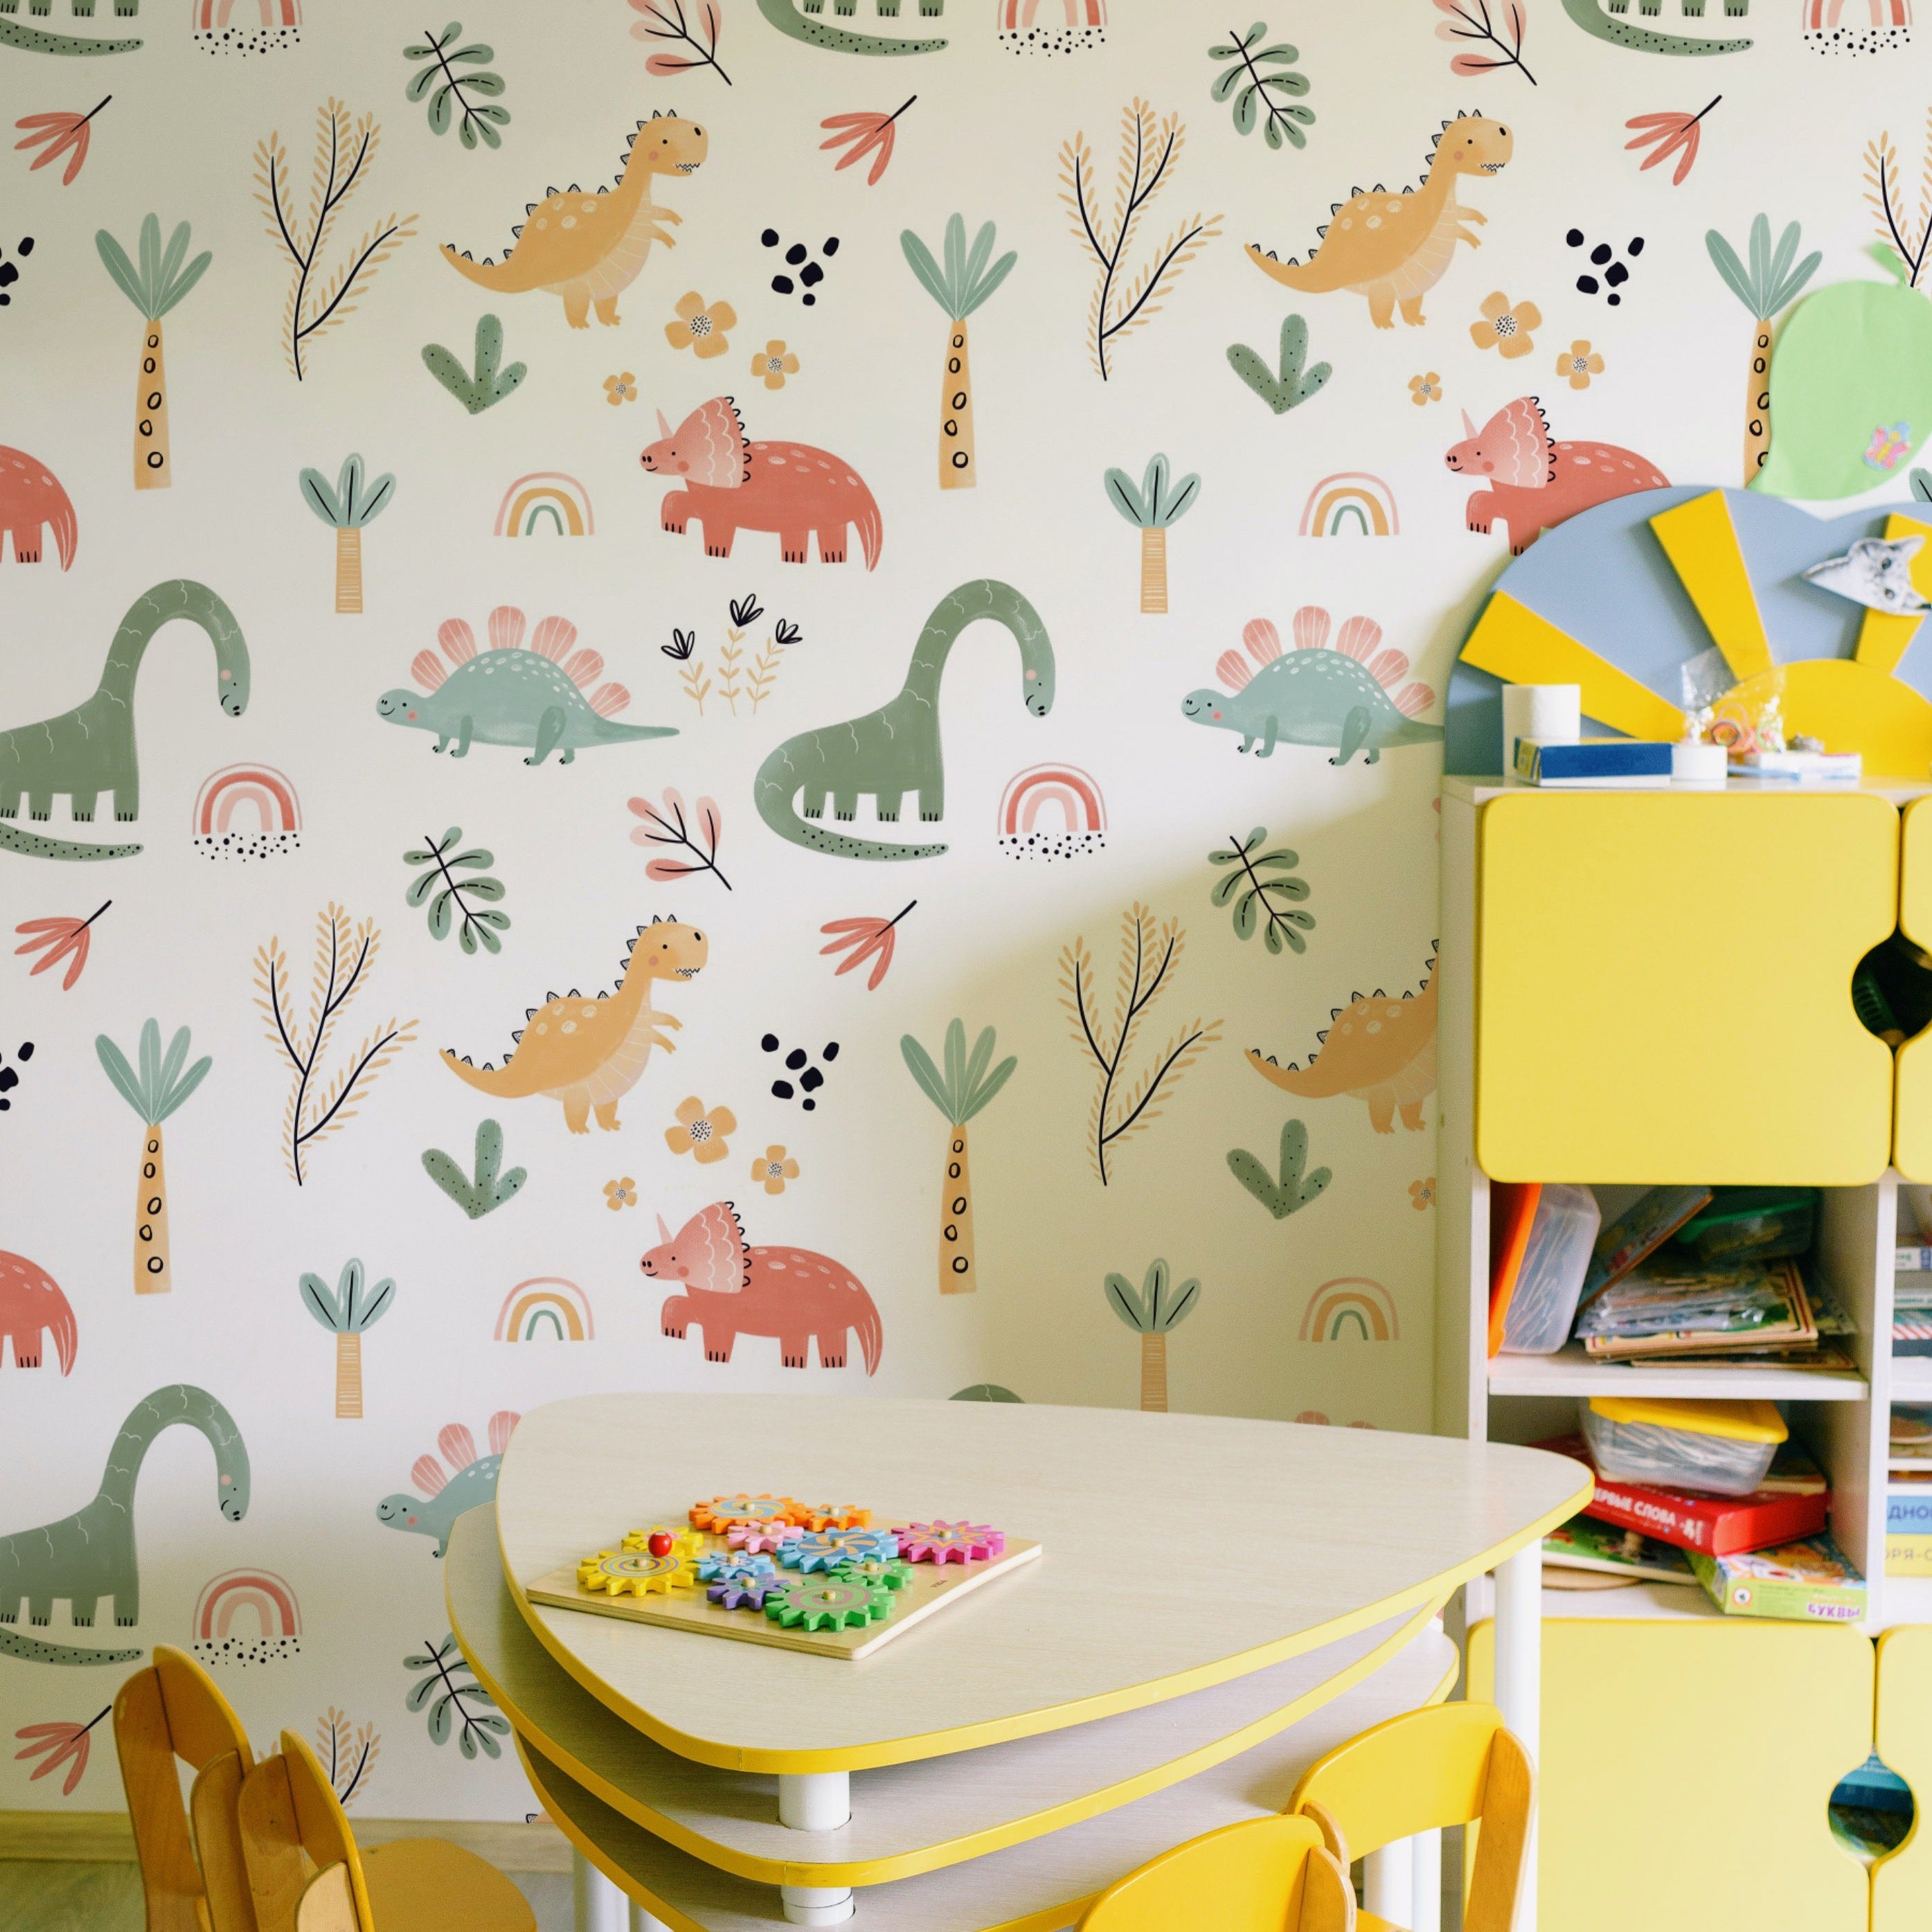 Buy Walls and Murals Jungle Race Animal Kids Peel and Stick Wallpaper in  Different Sizes (48” x 72”) Online at Low Prices in India - Amazon.in